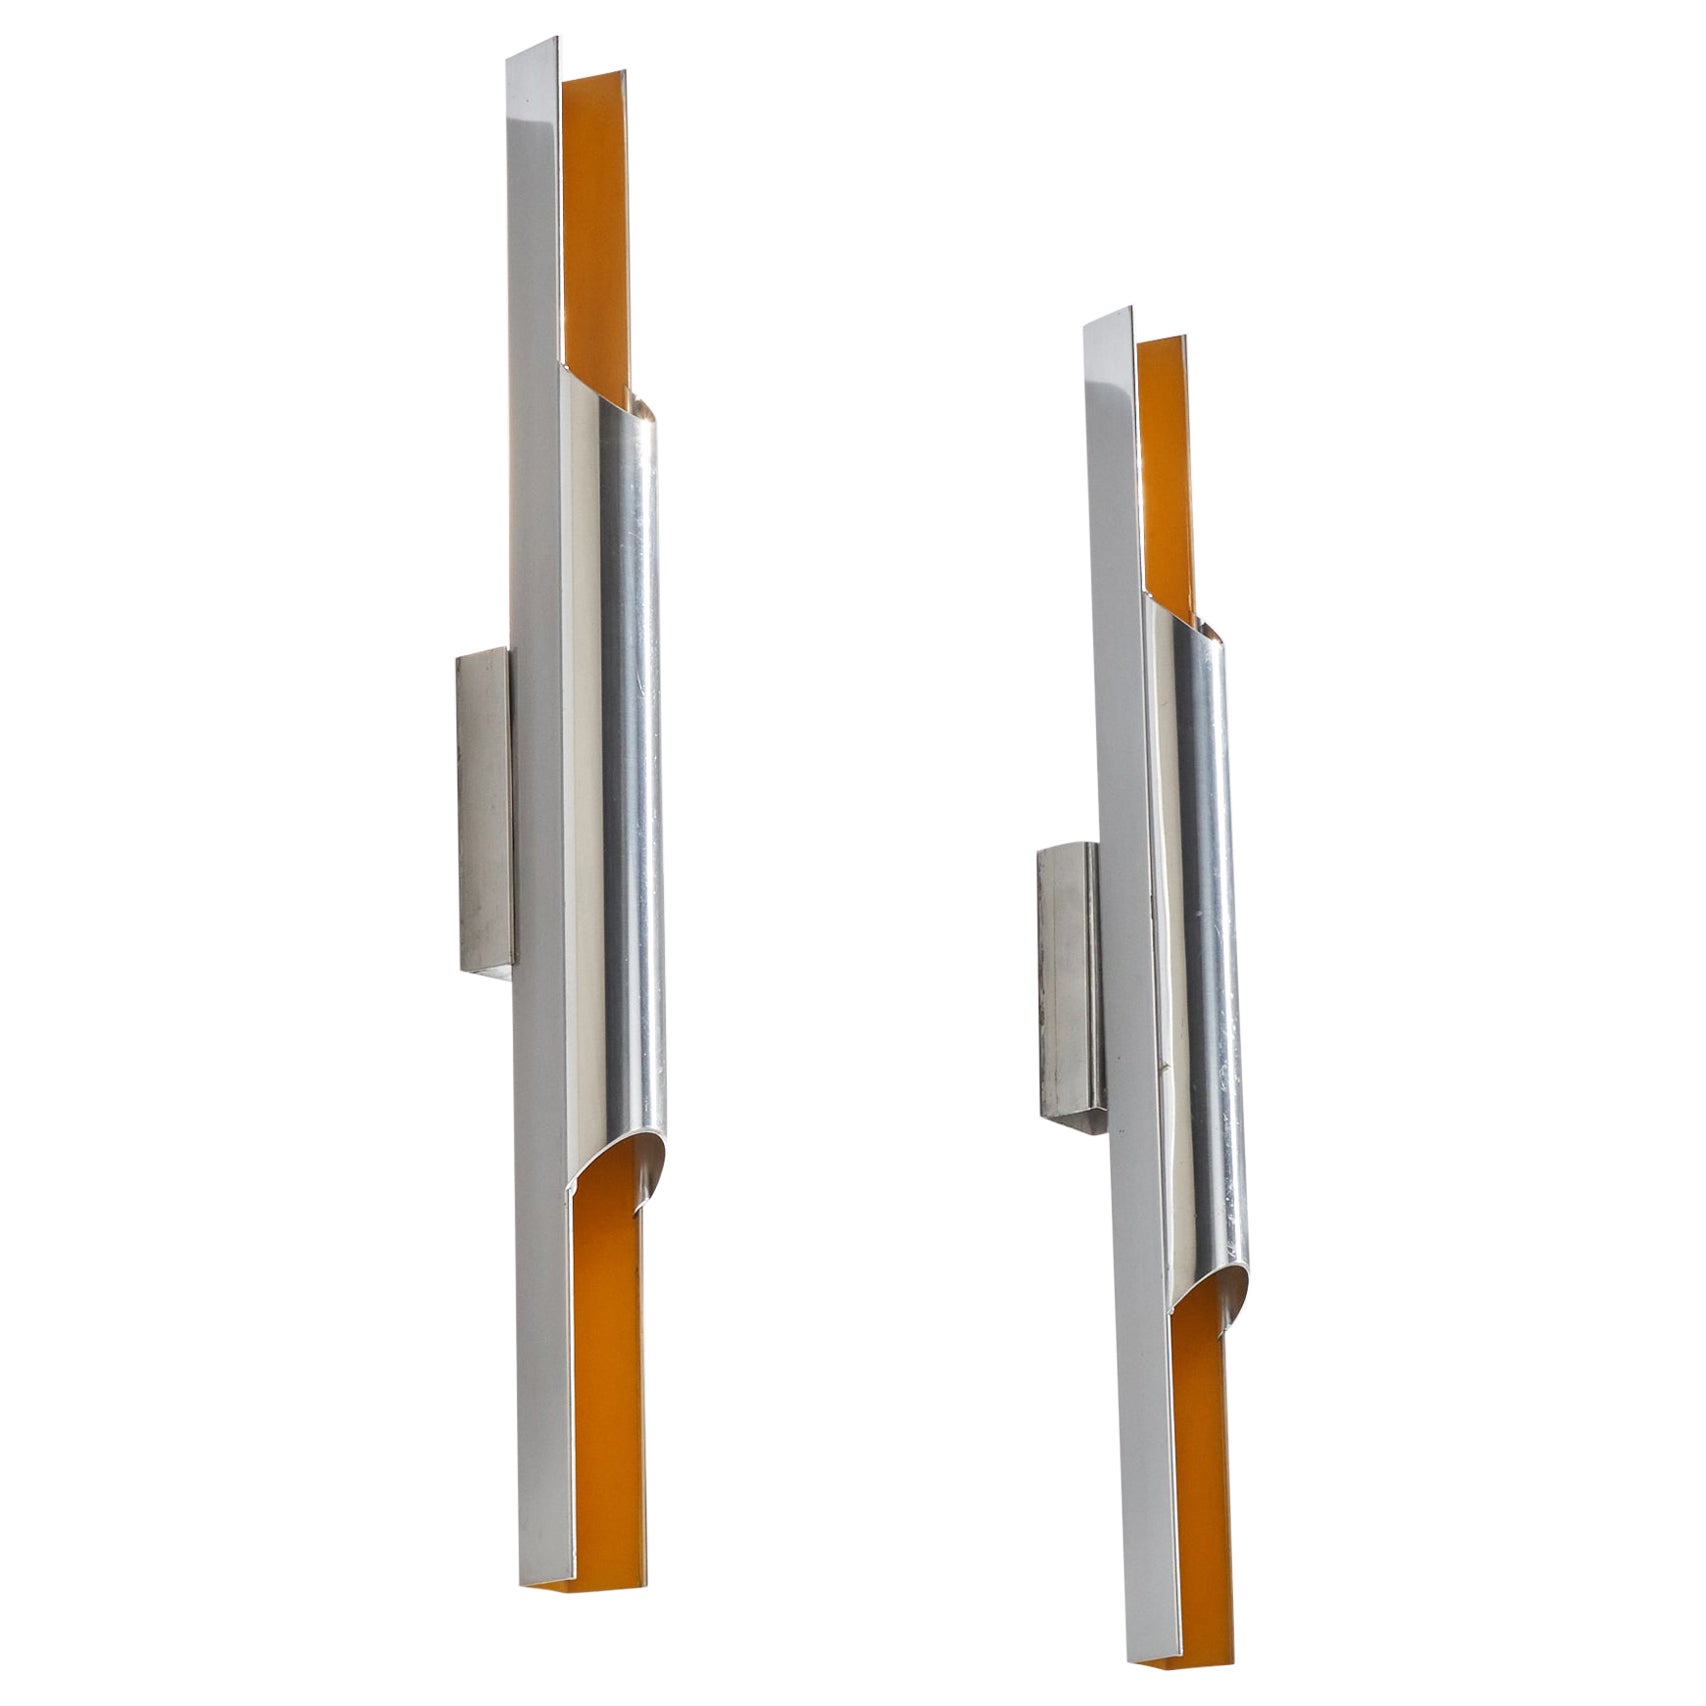 Bent Karlby, "Pandean" Wall Sconces, Aluminum, Denmark, 1960s For Sale